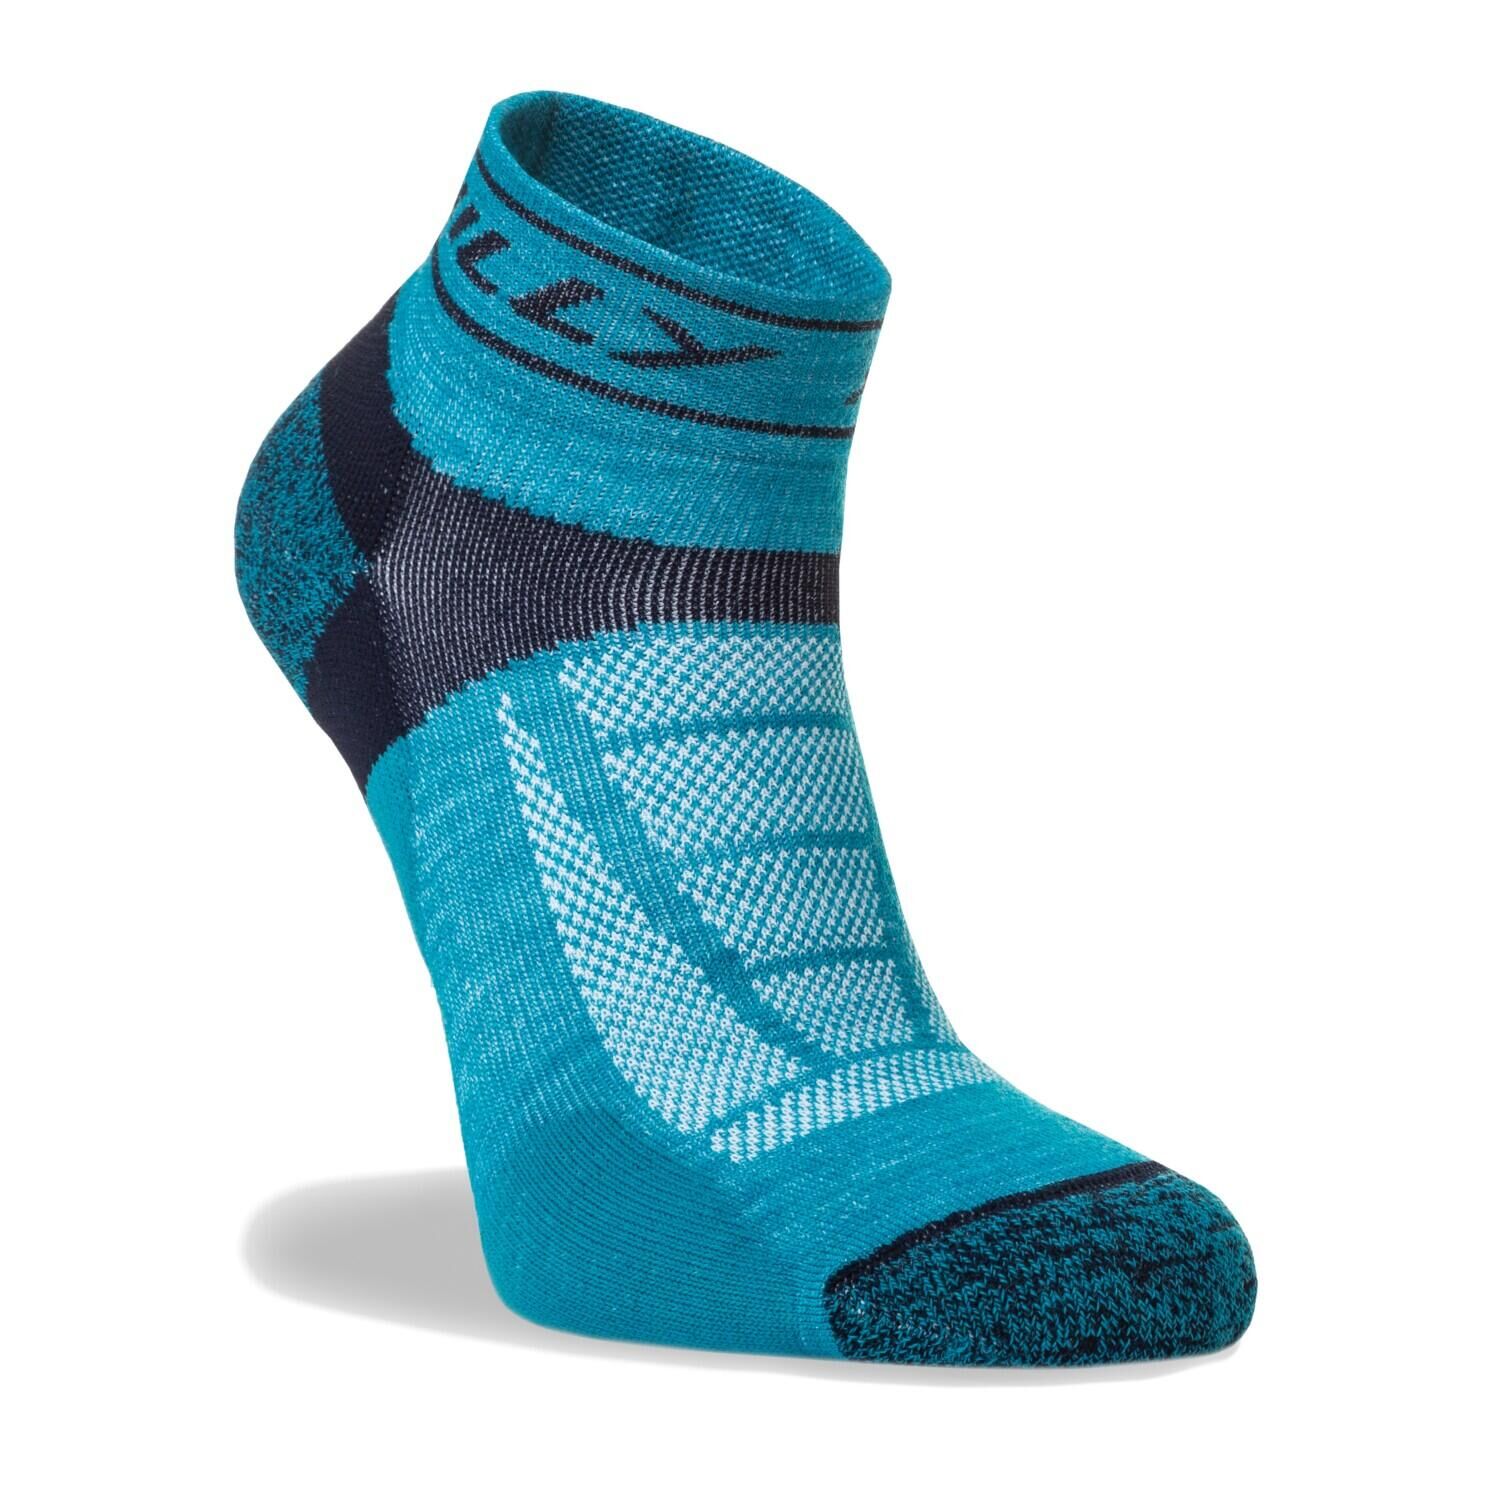 HILLY Hilly Trail Quarter Medium - Turquoise - Standaard sok (L/R) - Dames